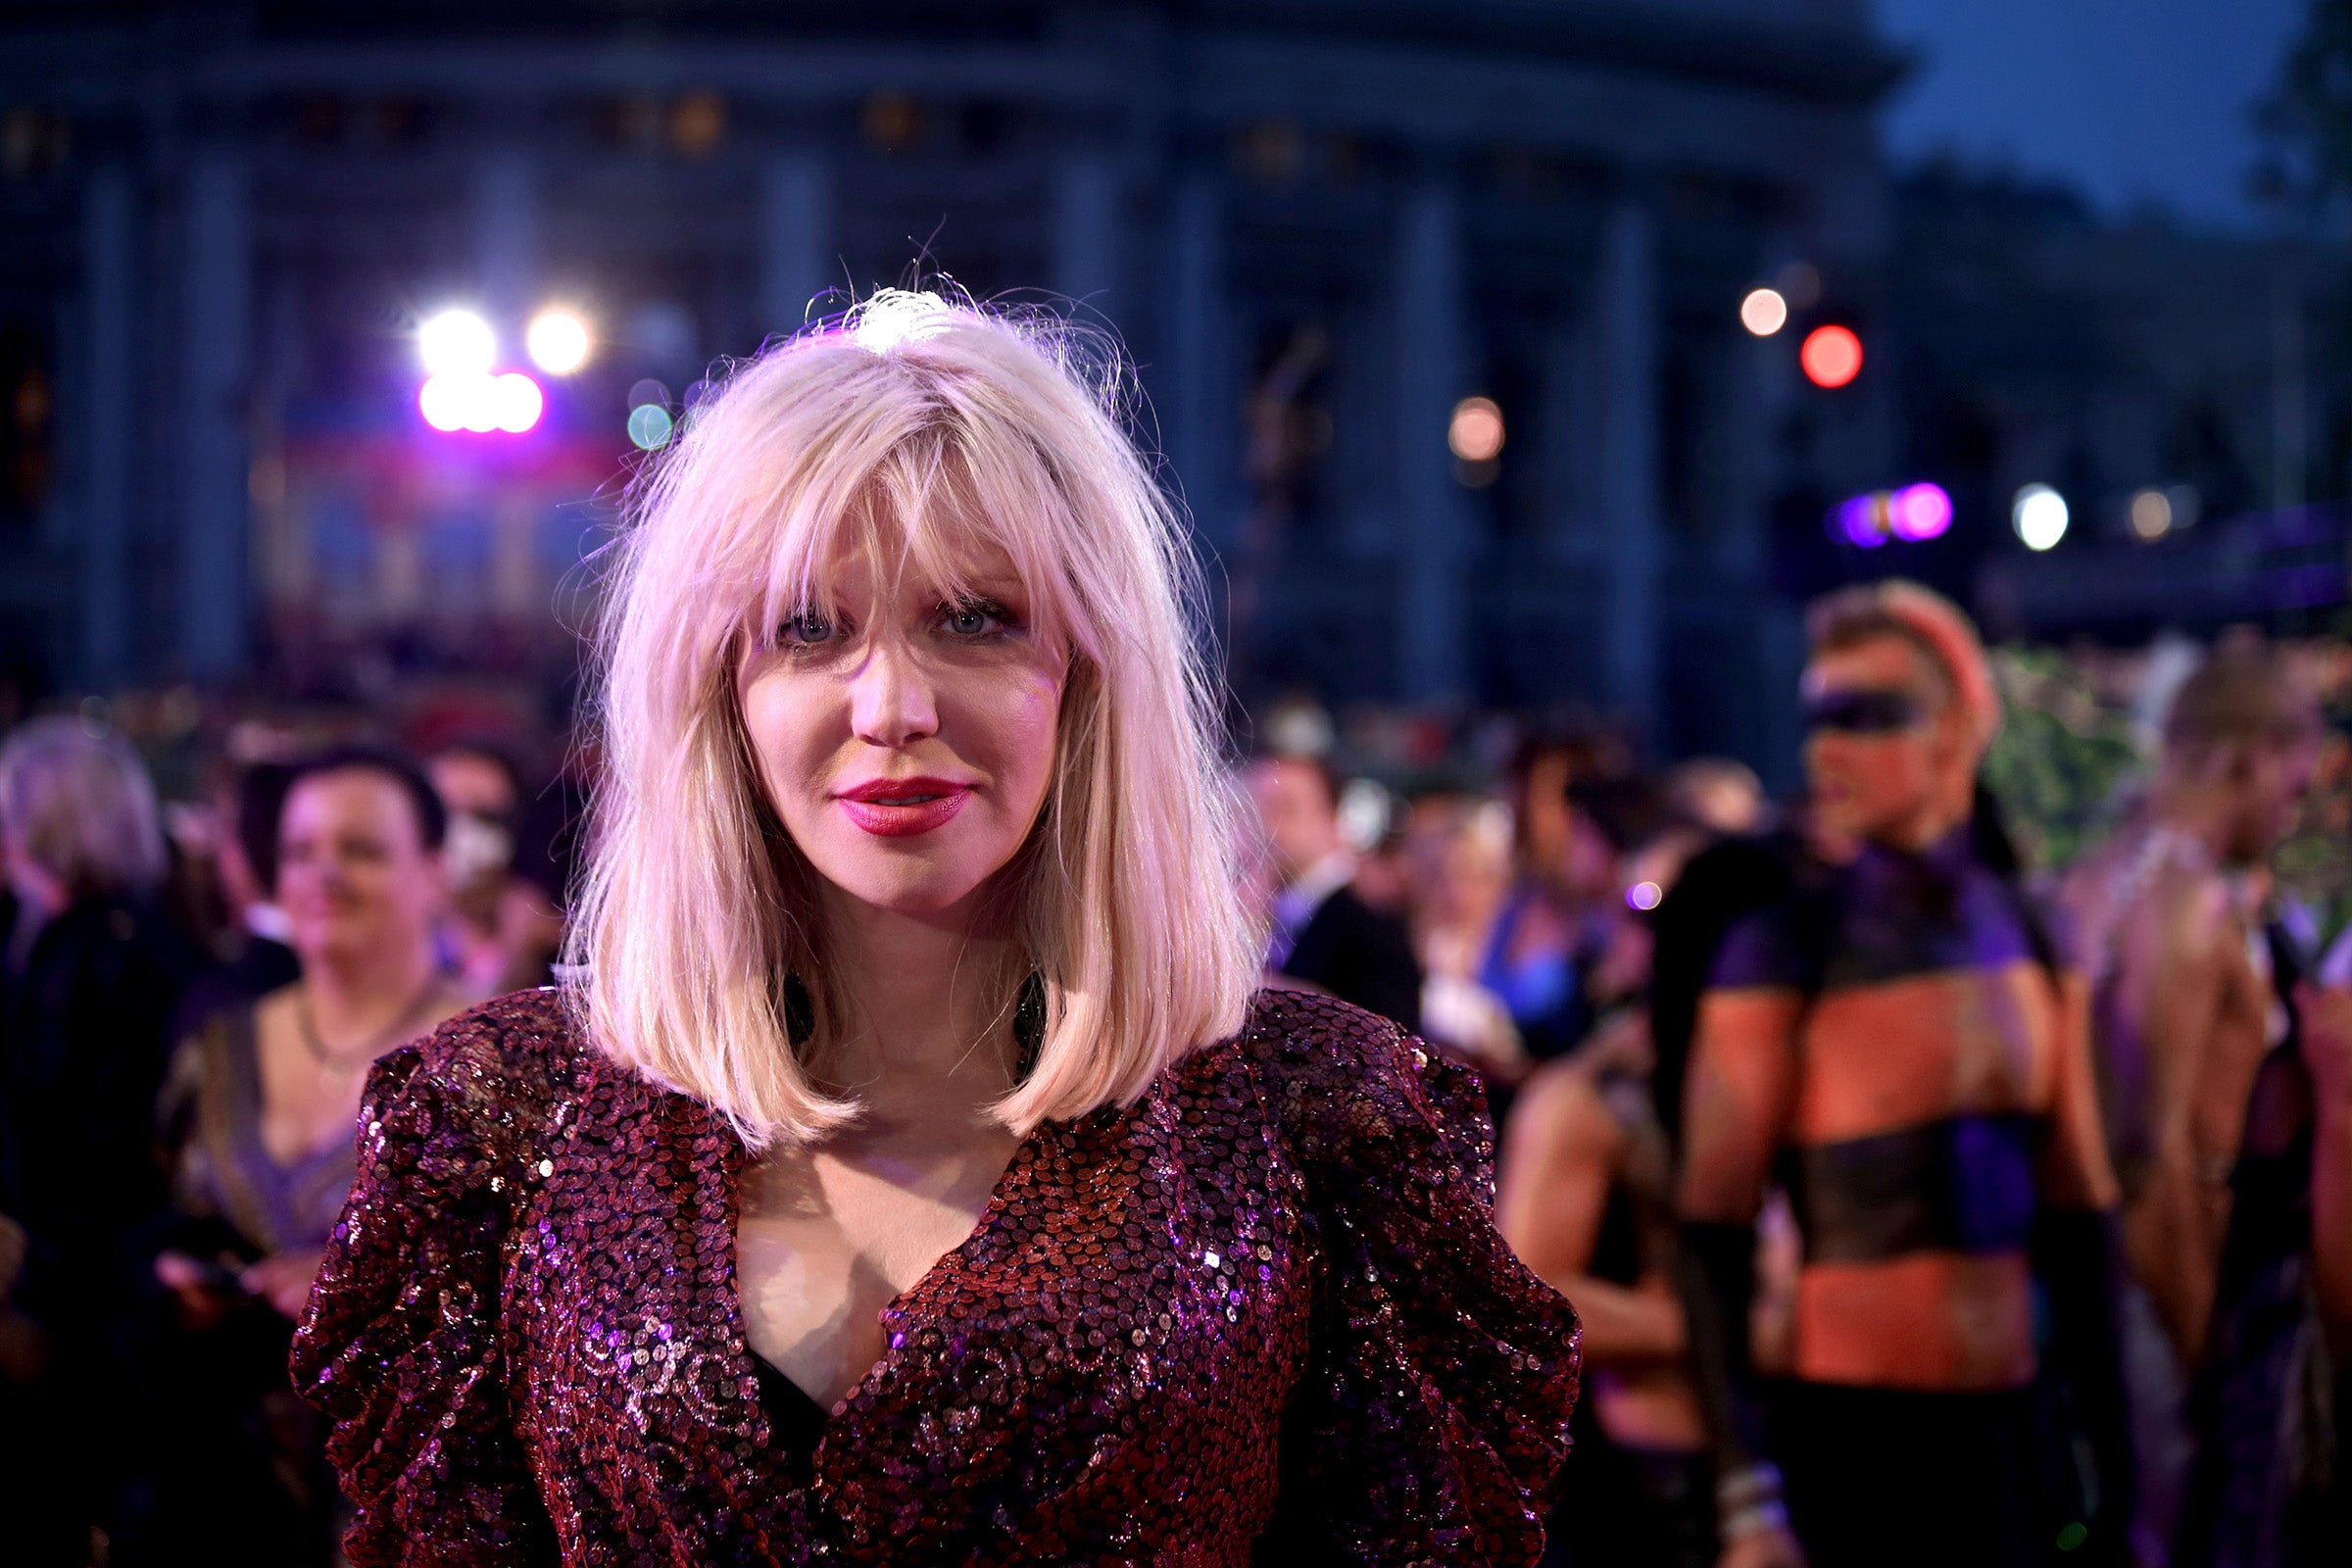 Courtney Love shares how CBD helped her recover from debilitating anemia symptoms